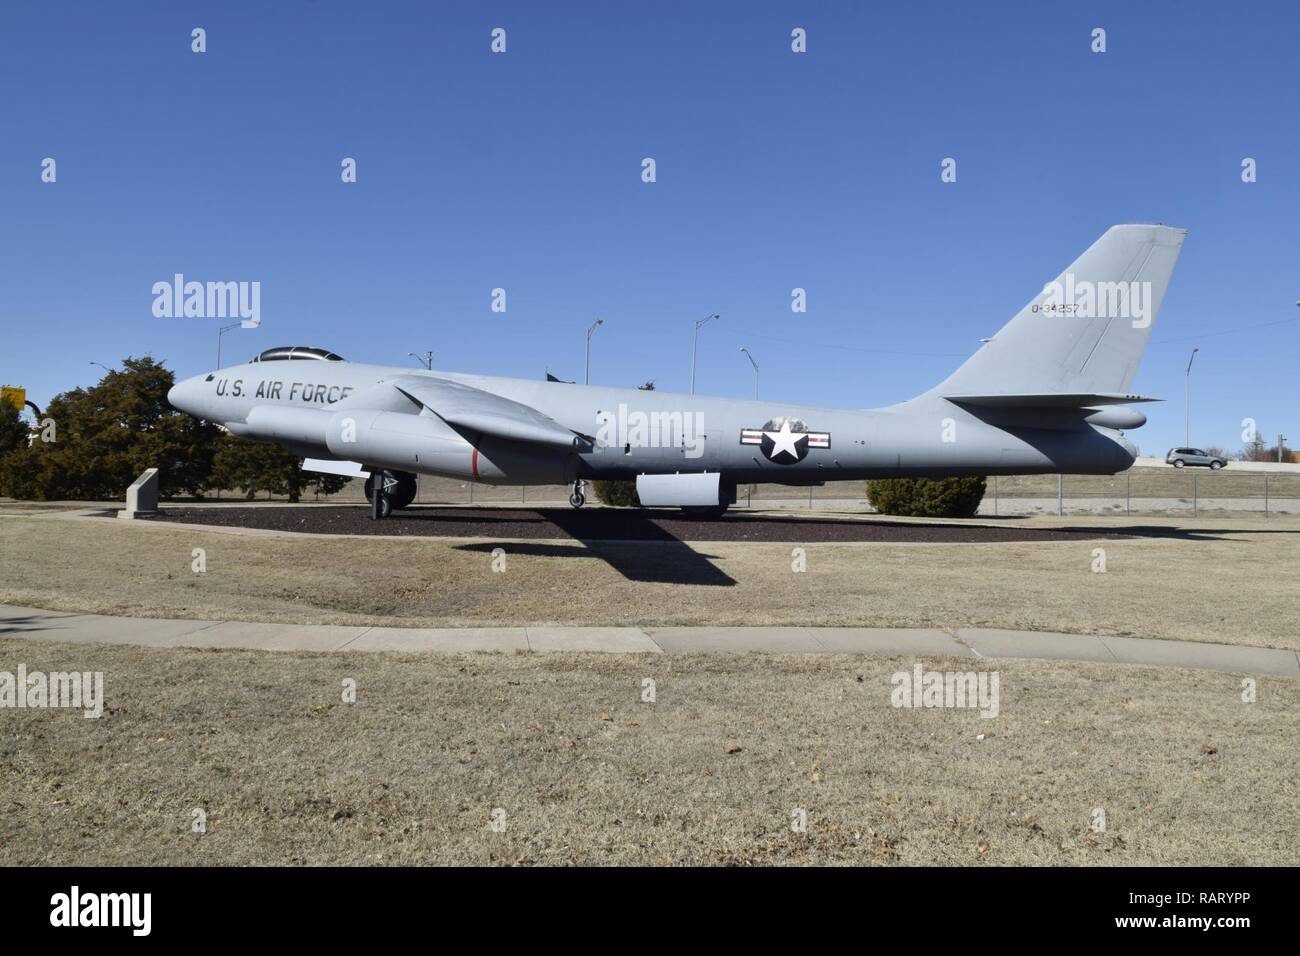 Boeing B-47 Stratojet aircraft on display in the Charles B. Hall Memorial Air Park on Feb. 16, 2017, at Tinker Air Force Base, Oklahoma. The free public park features aircraft operated or maintained by Tinker AFB over the years and is located near the main entrance to the base with free parking available. Stock Photo